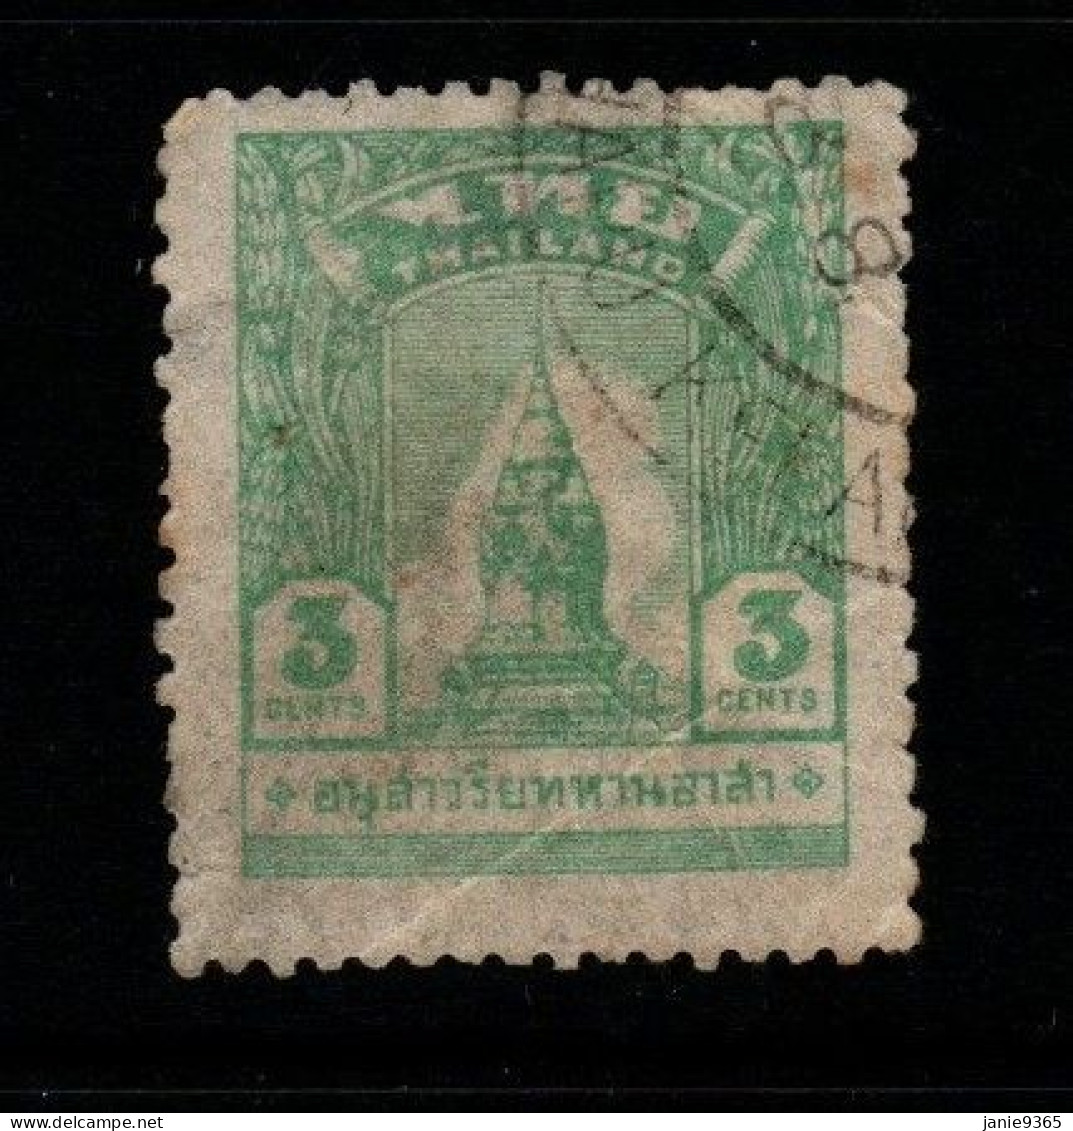 Thailand Cat 315  1944  Thai Occupation In Malay,3c Green,used - Thailand